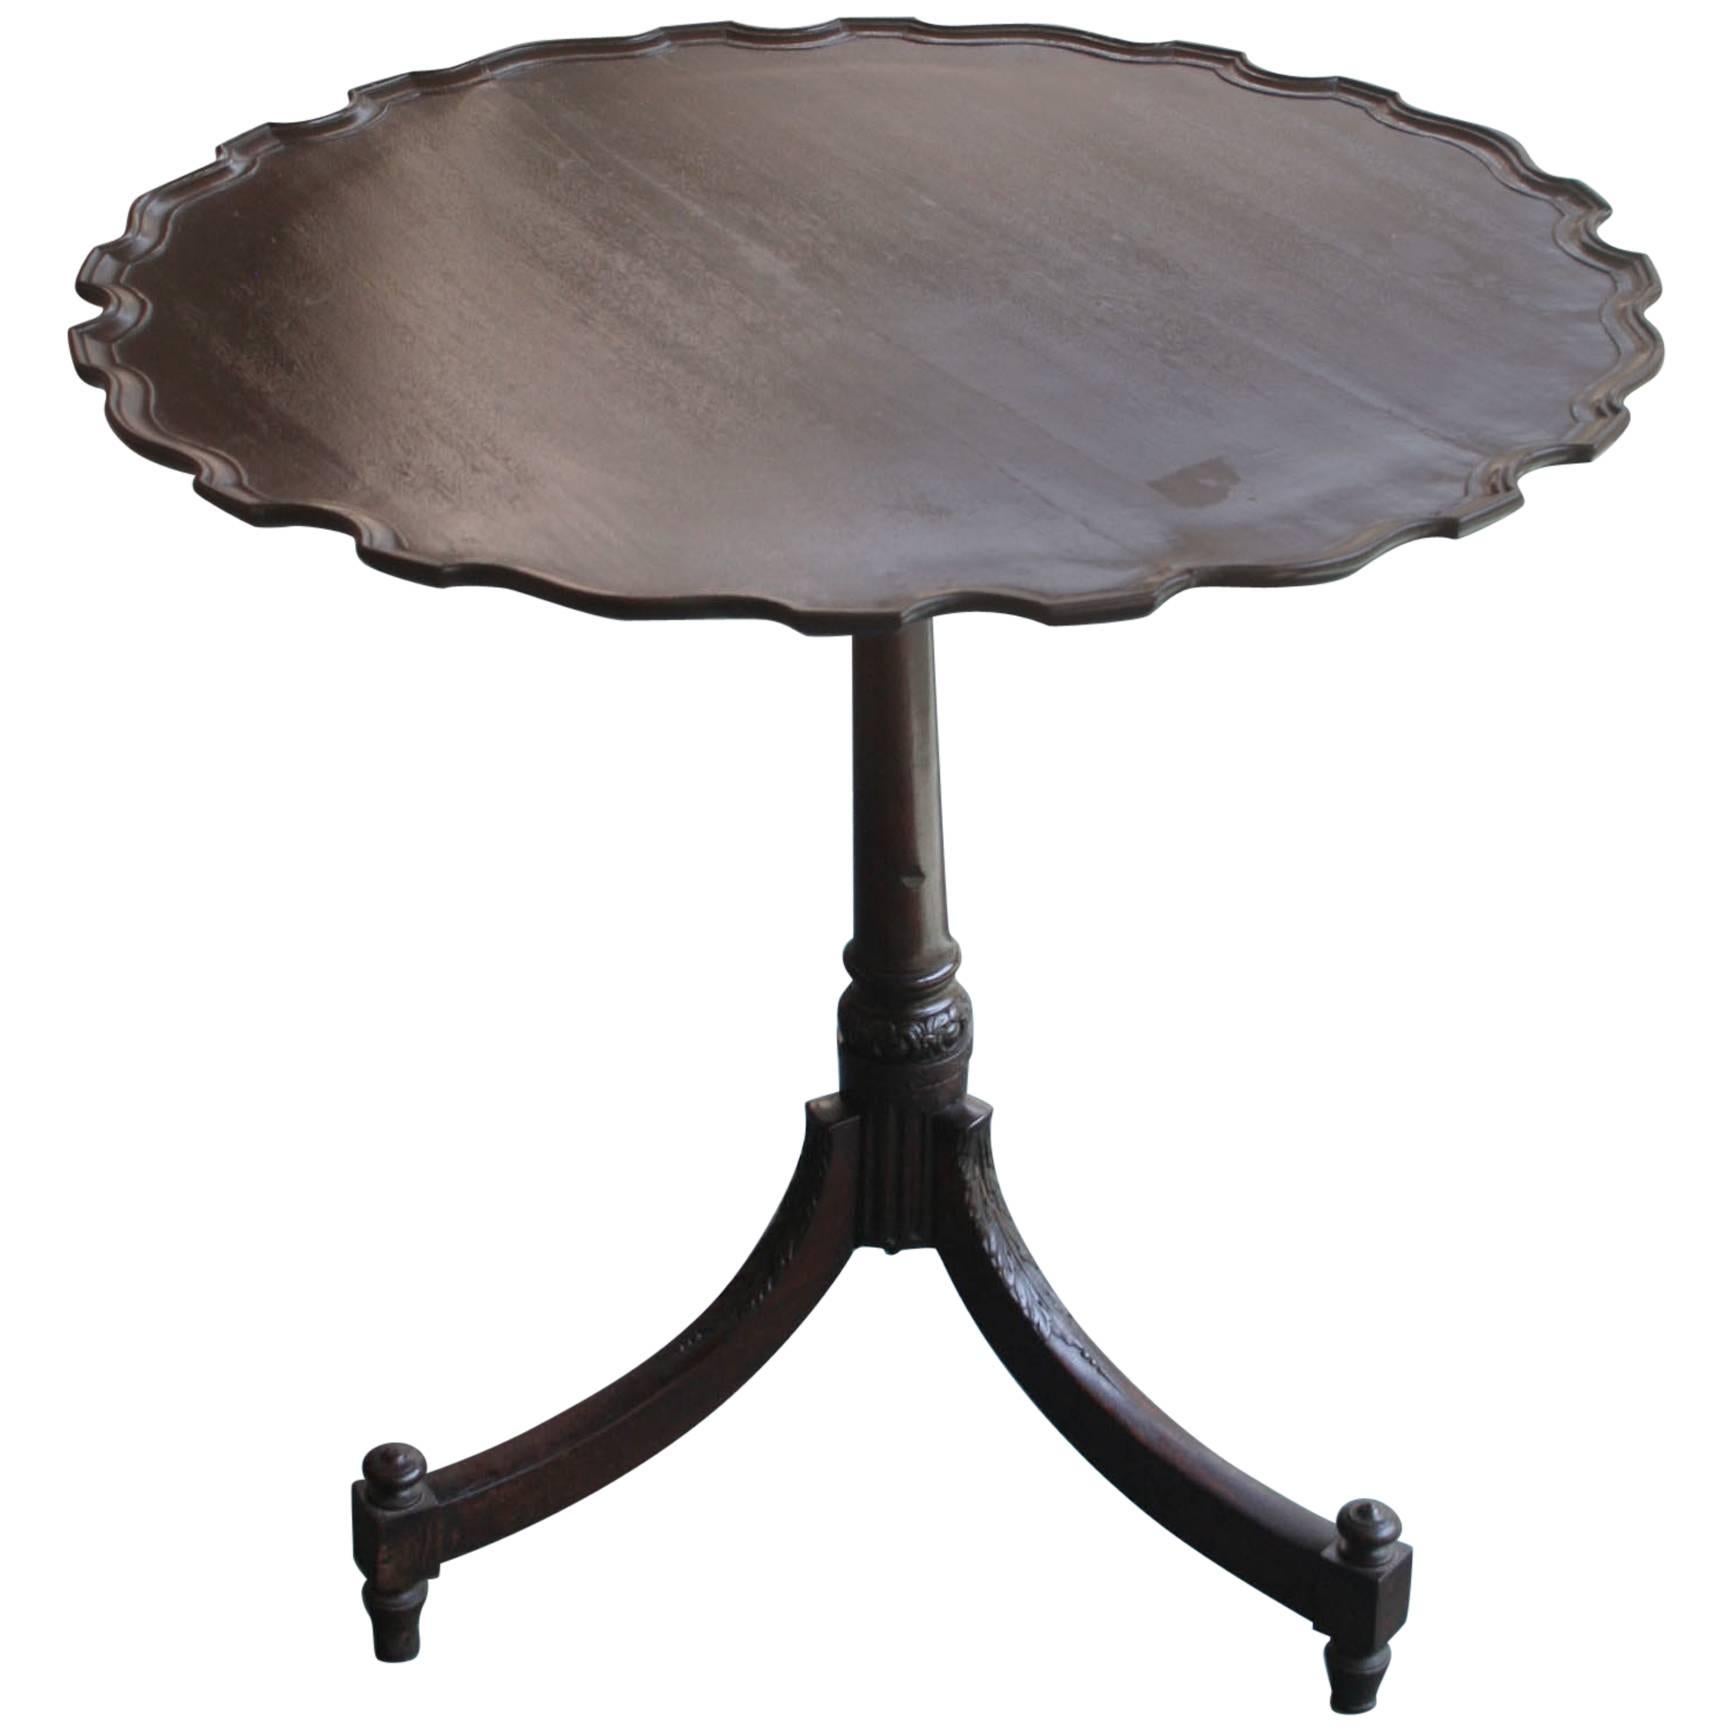 Rare 18th Century Anglo-Indian Piecrust Tea Table Made in India for the British For Sale